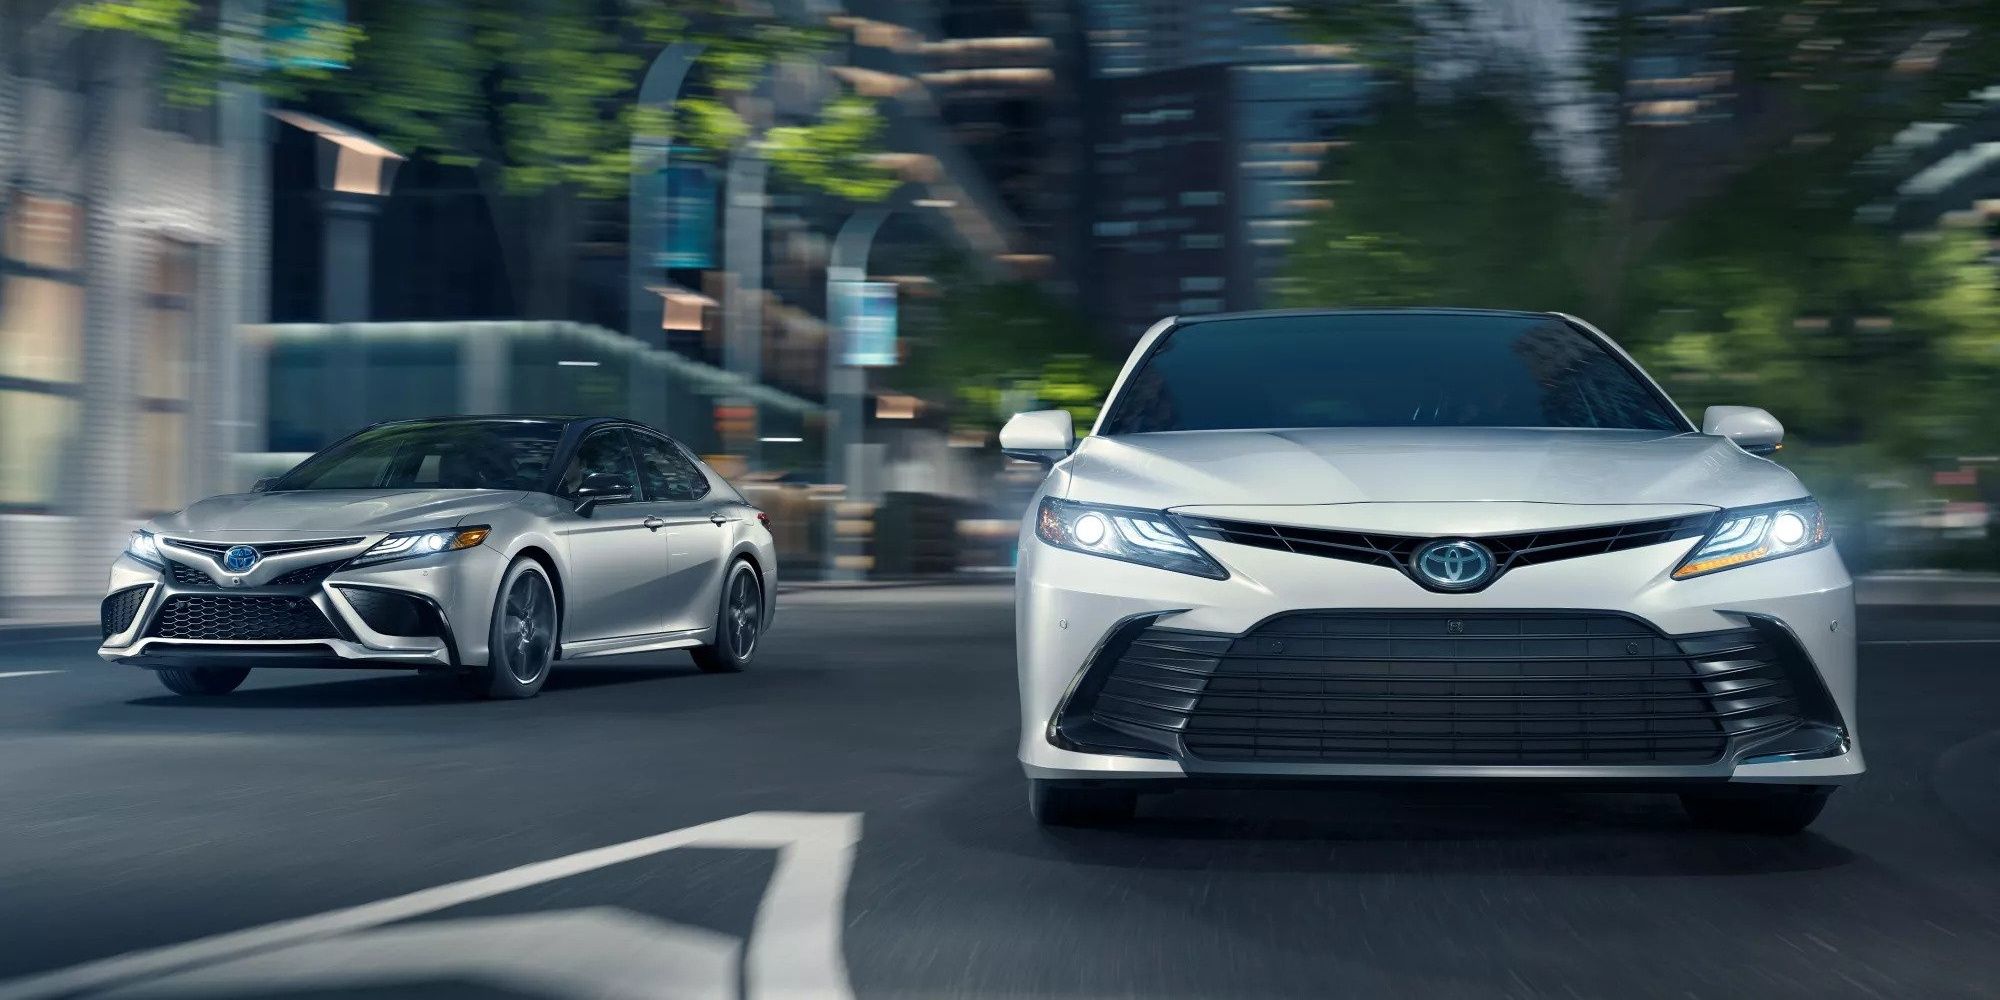 Toyota Camry Vs Corolla Here's How The Two Models Compare